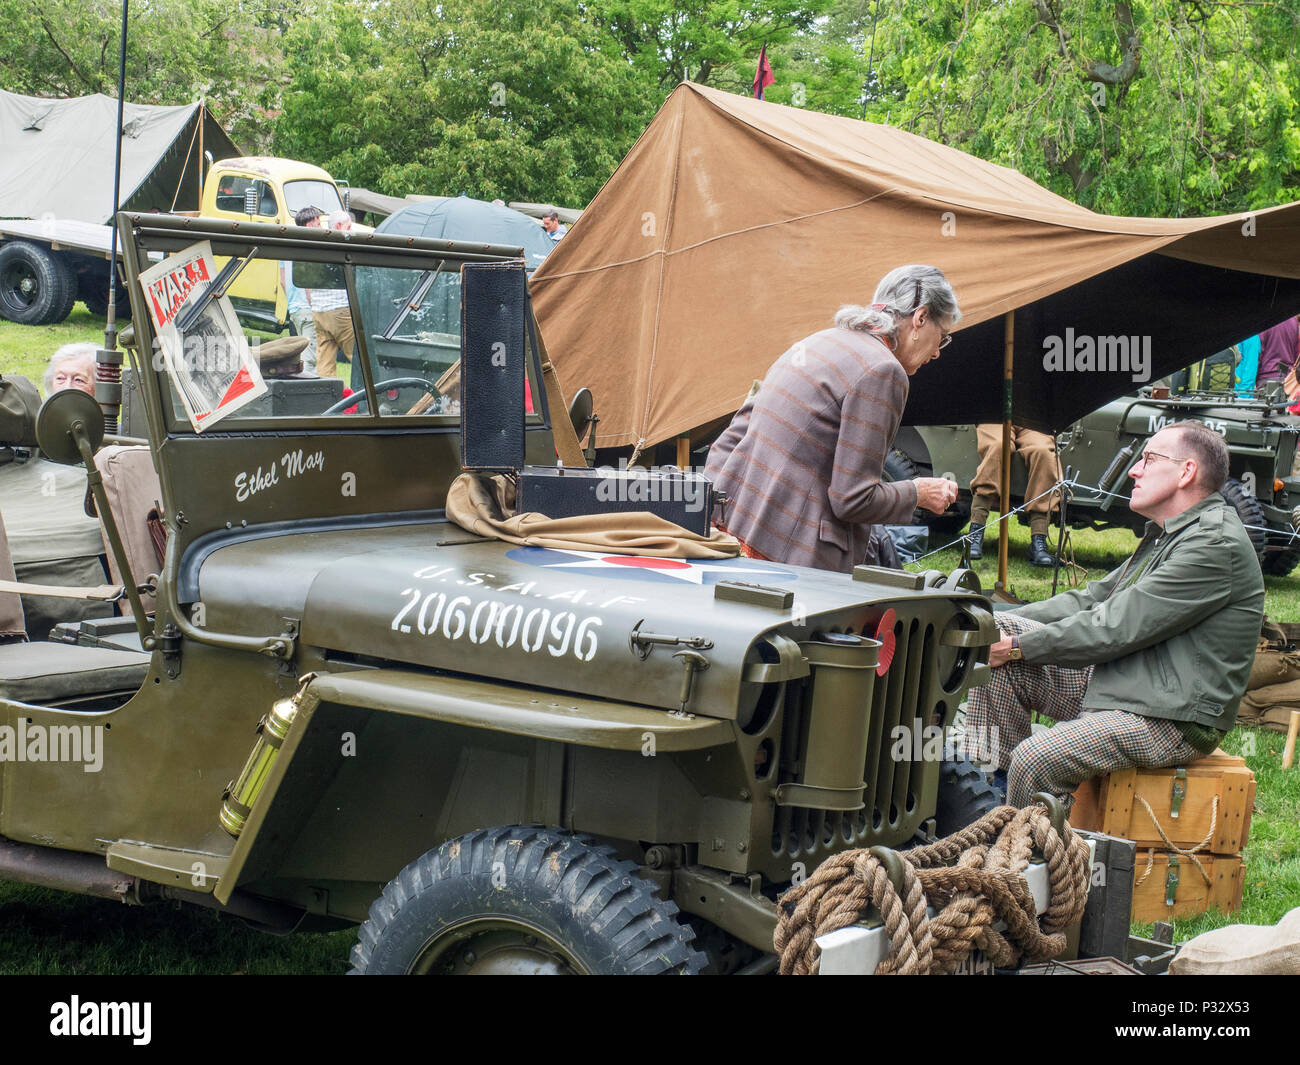 Harrogate, Yorkshire, UK. 17th Jun, 2018. UK Yorkshire Harrogate Valley Gardens USAAF Jeep and people in period dress at the Harrogate 1940s Day 17 June 2018 Credit: Mark Sunderland/Alamy Live News Stock Photo